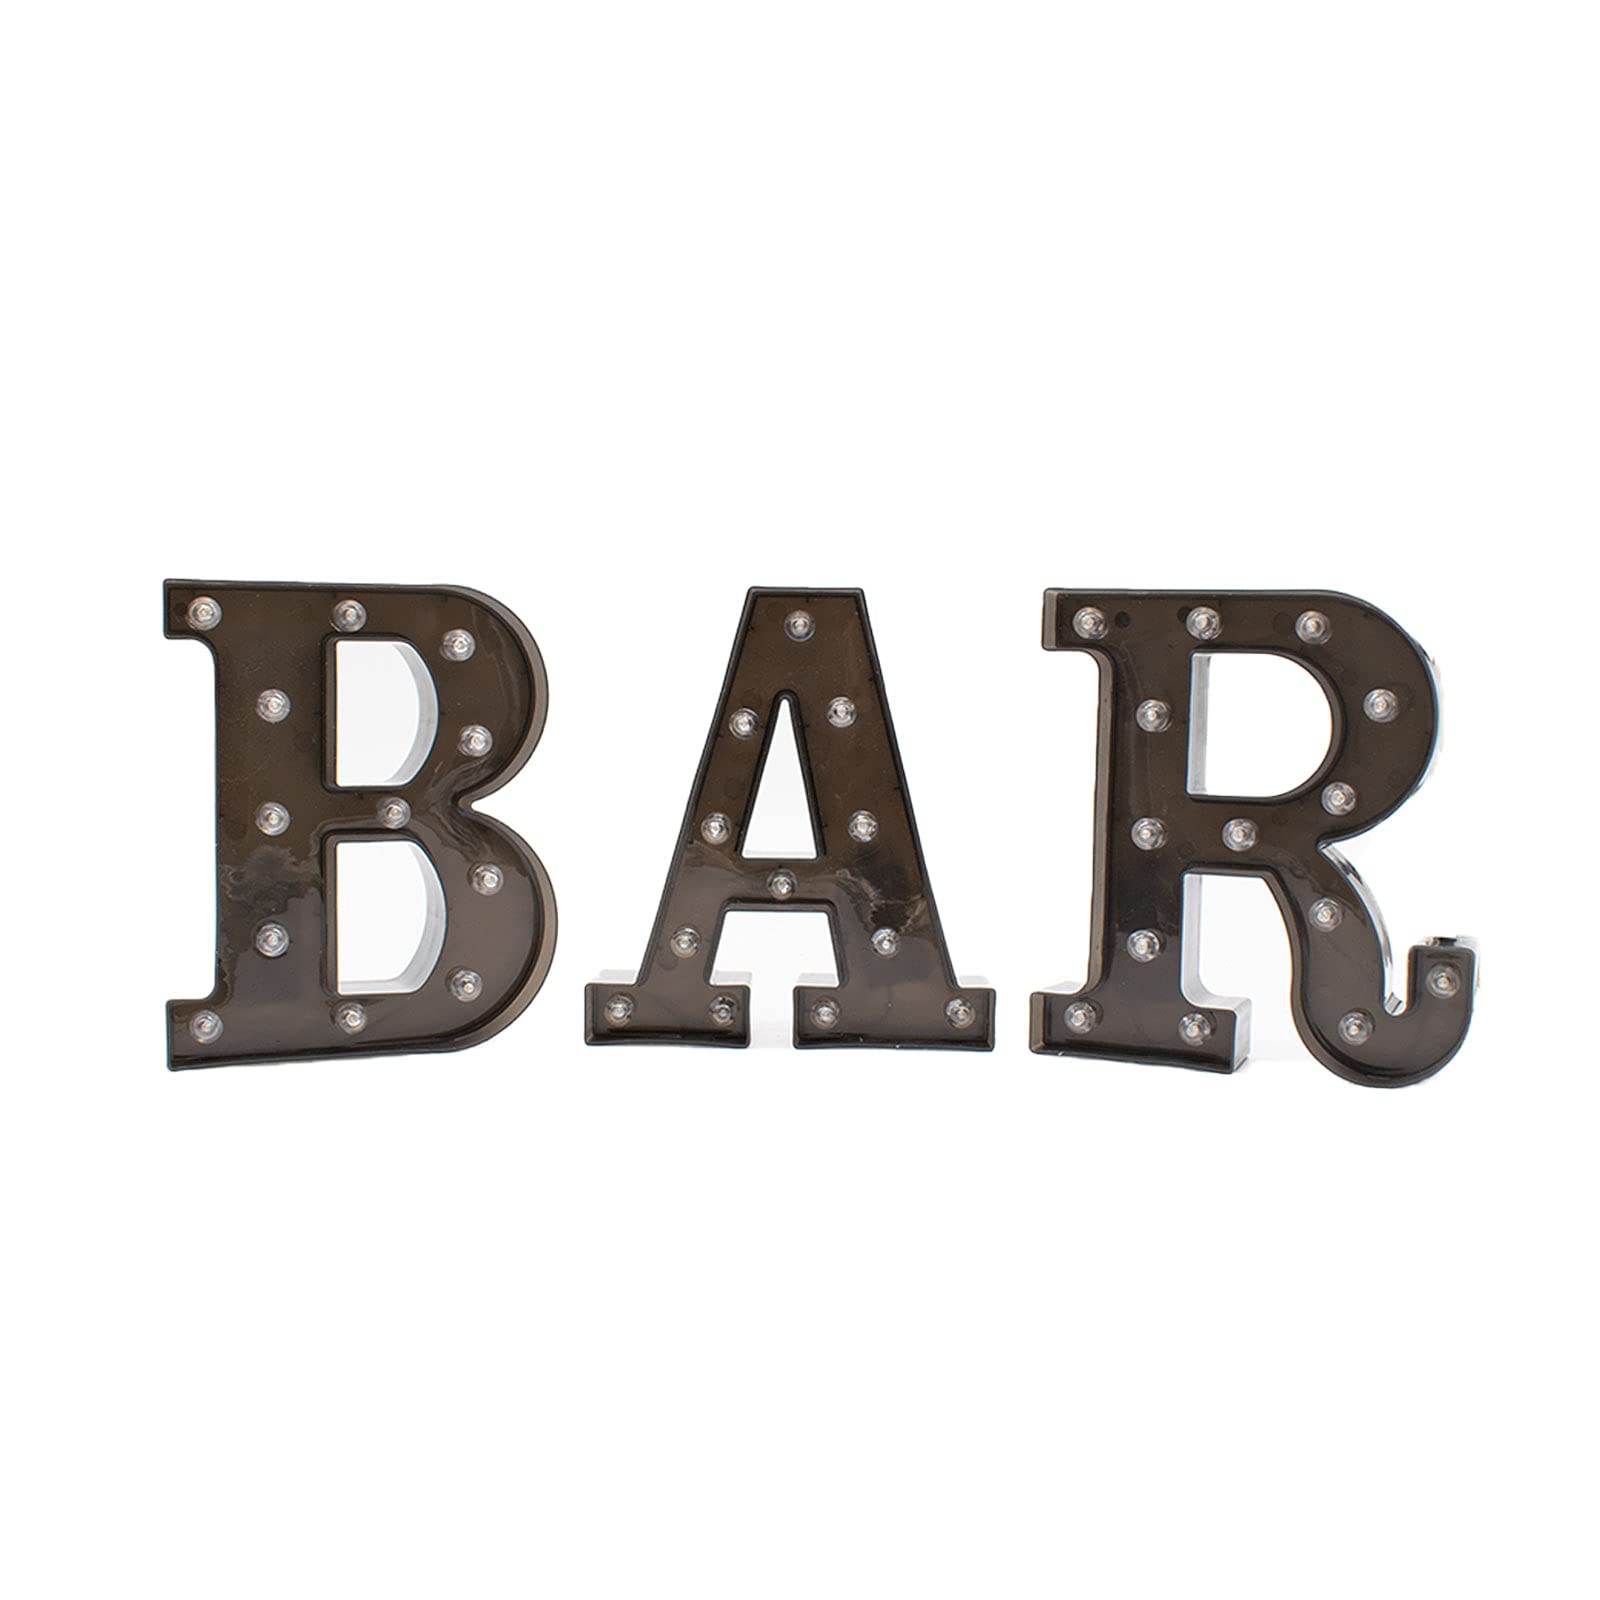 TRIXES Black LED Light Up BAR Letters Sign Perfect for Your Home, Pub or Beer Garden Accessories – Aesthetic Battery Powered Letter Sign with Lights Great for Hanging on Walls Putting on Tables & More